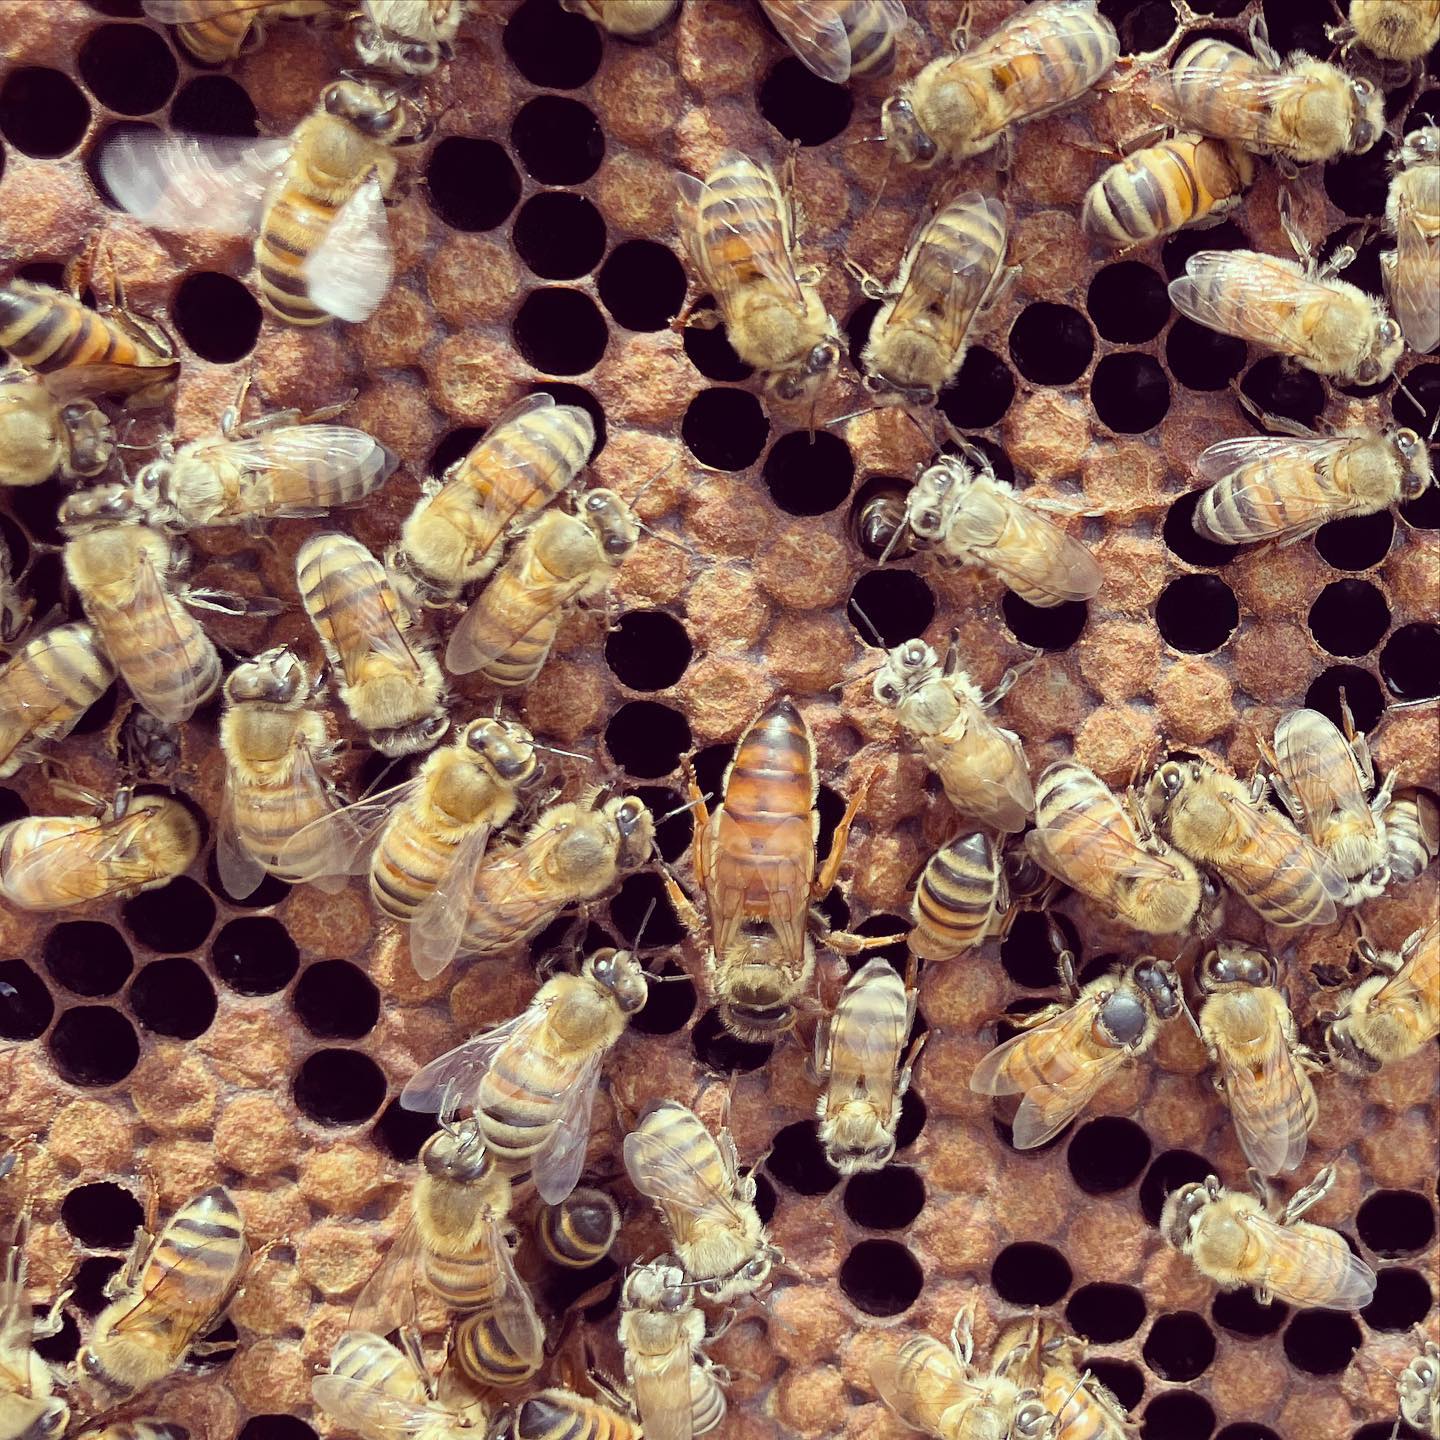 Beekeeping Workshop at The Little Farm Miami